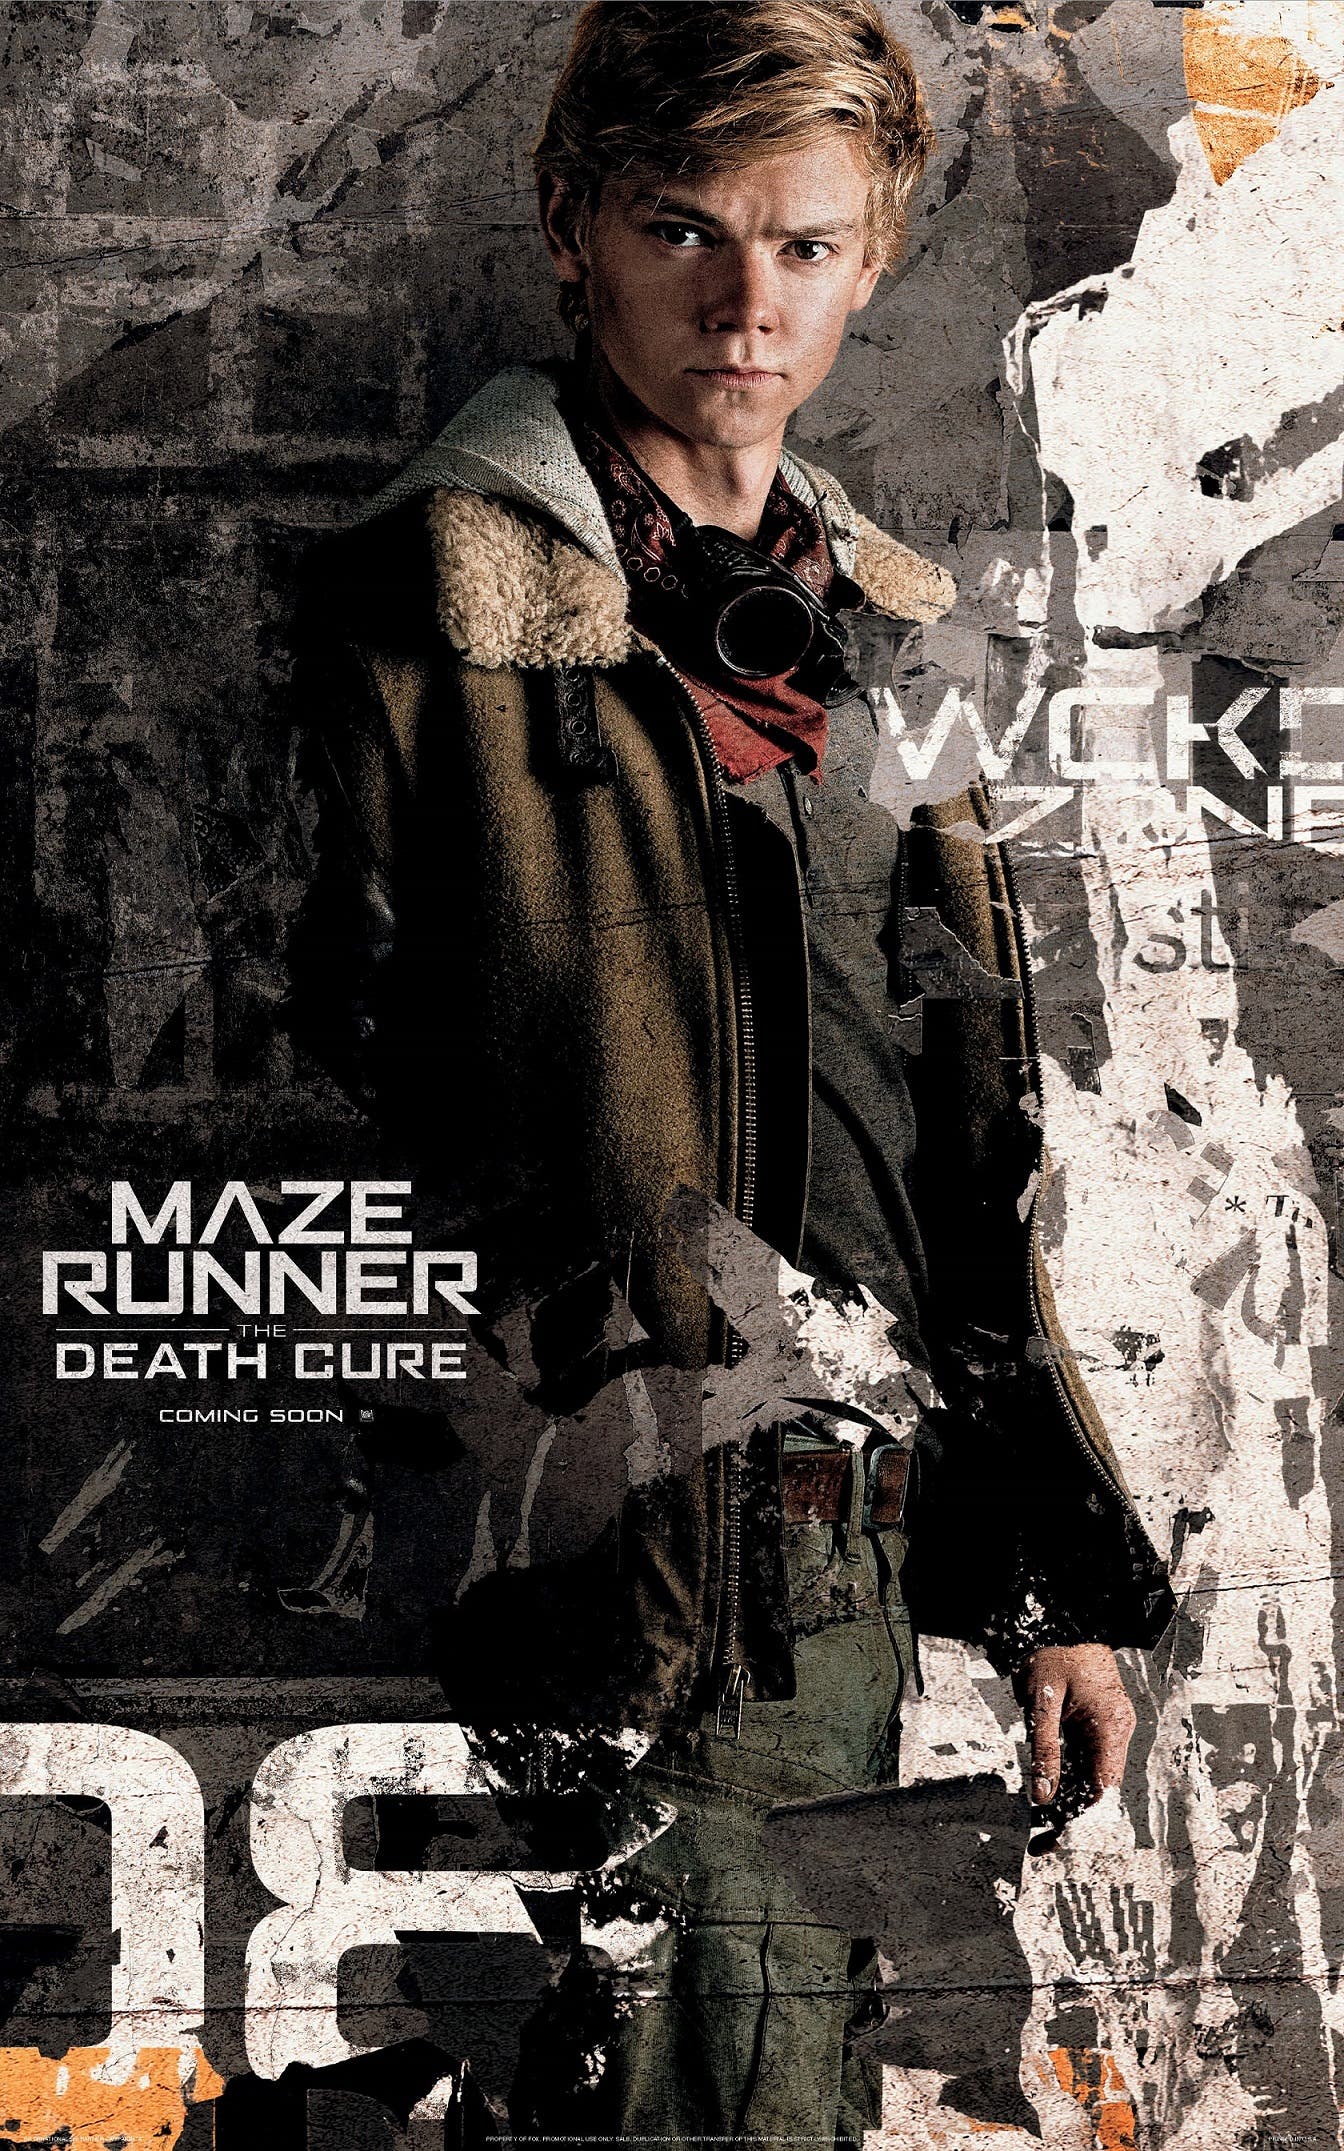 ‘Maze Runner: The Death Cure’ Character Posters and Trailer | Starmometer1344 x 2151